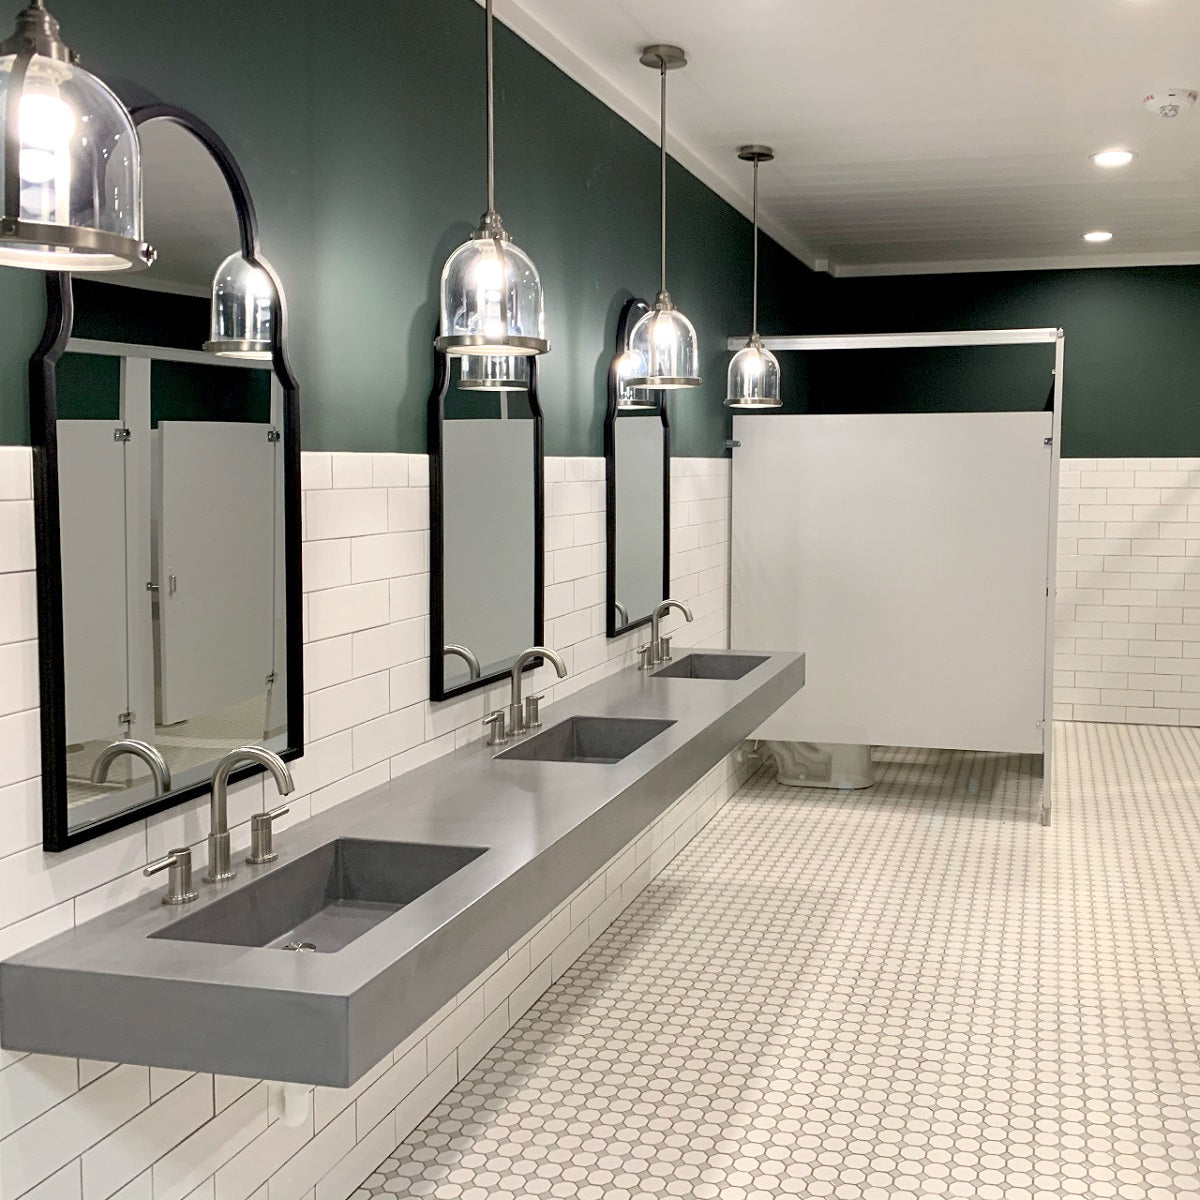 Commercial bathroom with gray concrete sinks and marble flooring and tile backsplash.